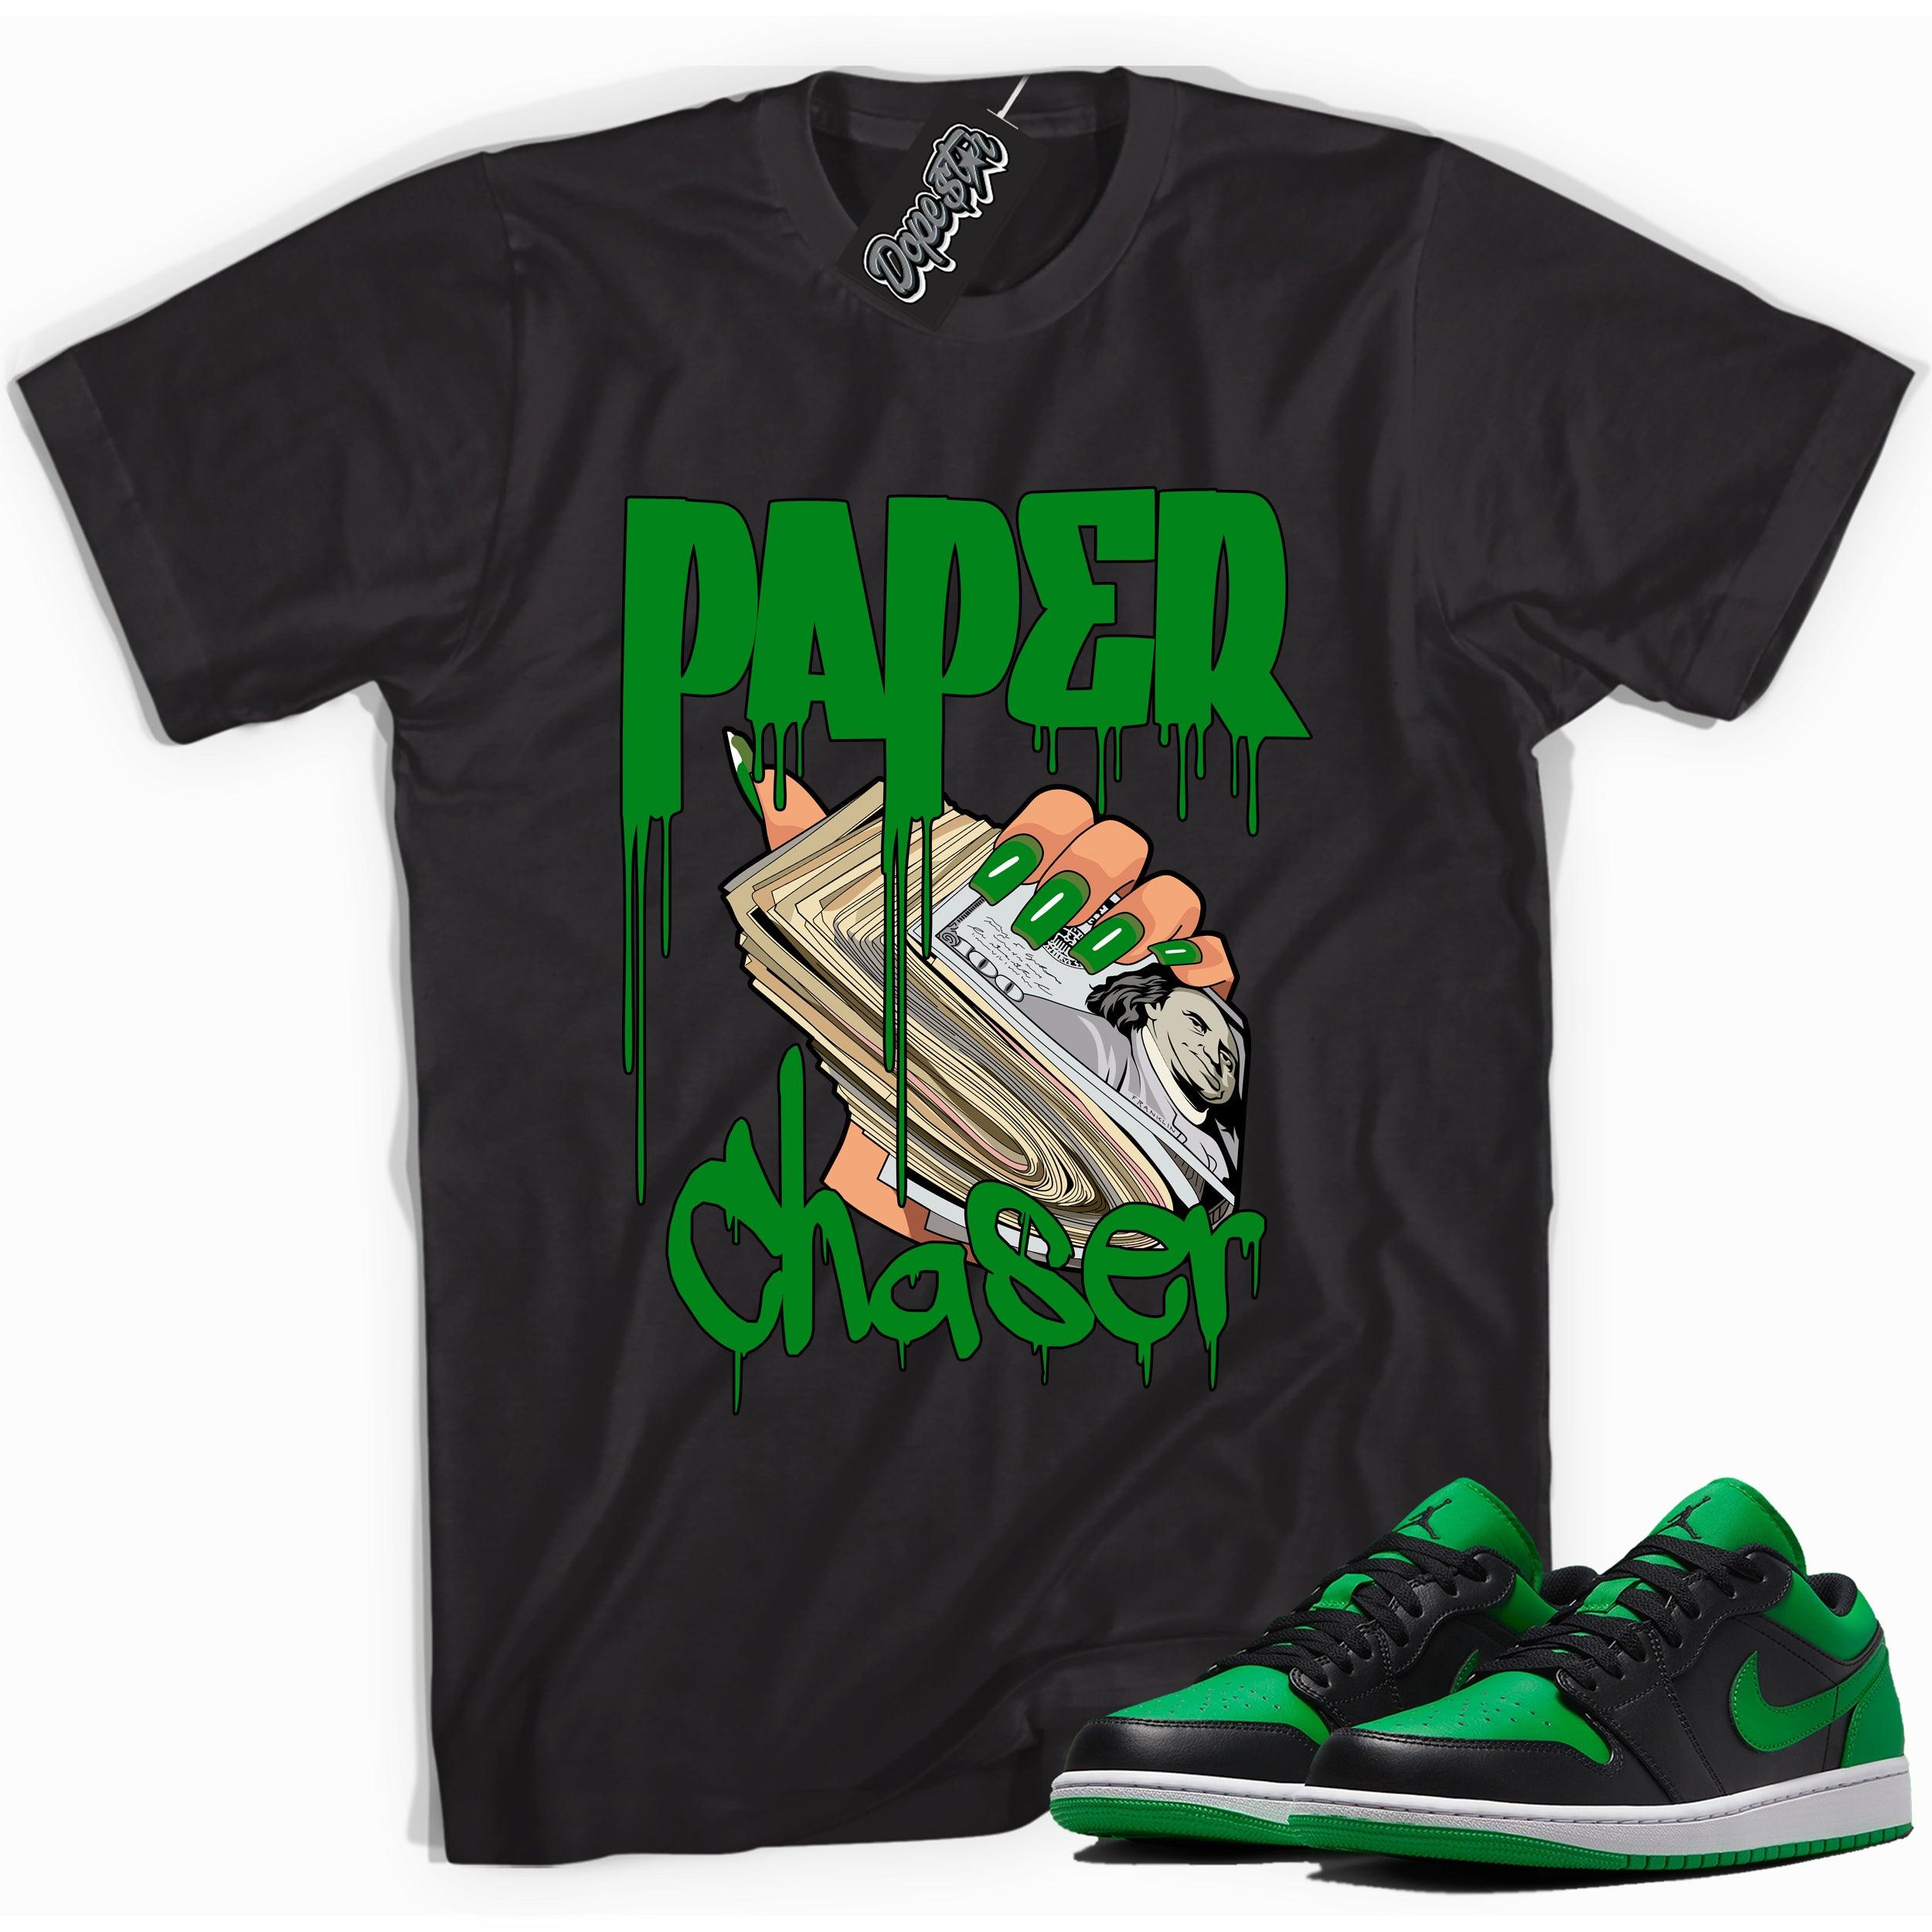 Cool black graphic tee with 'paper chaser' print, that perfectly matches Air Jordan 1 Low Lucky Green sneakers